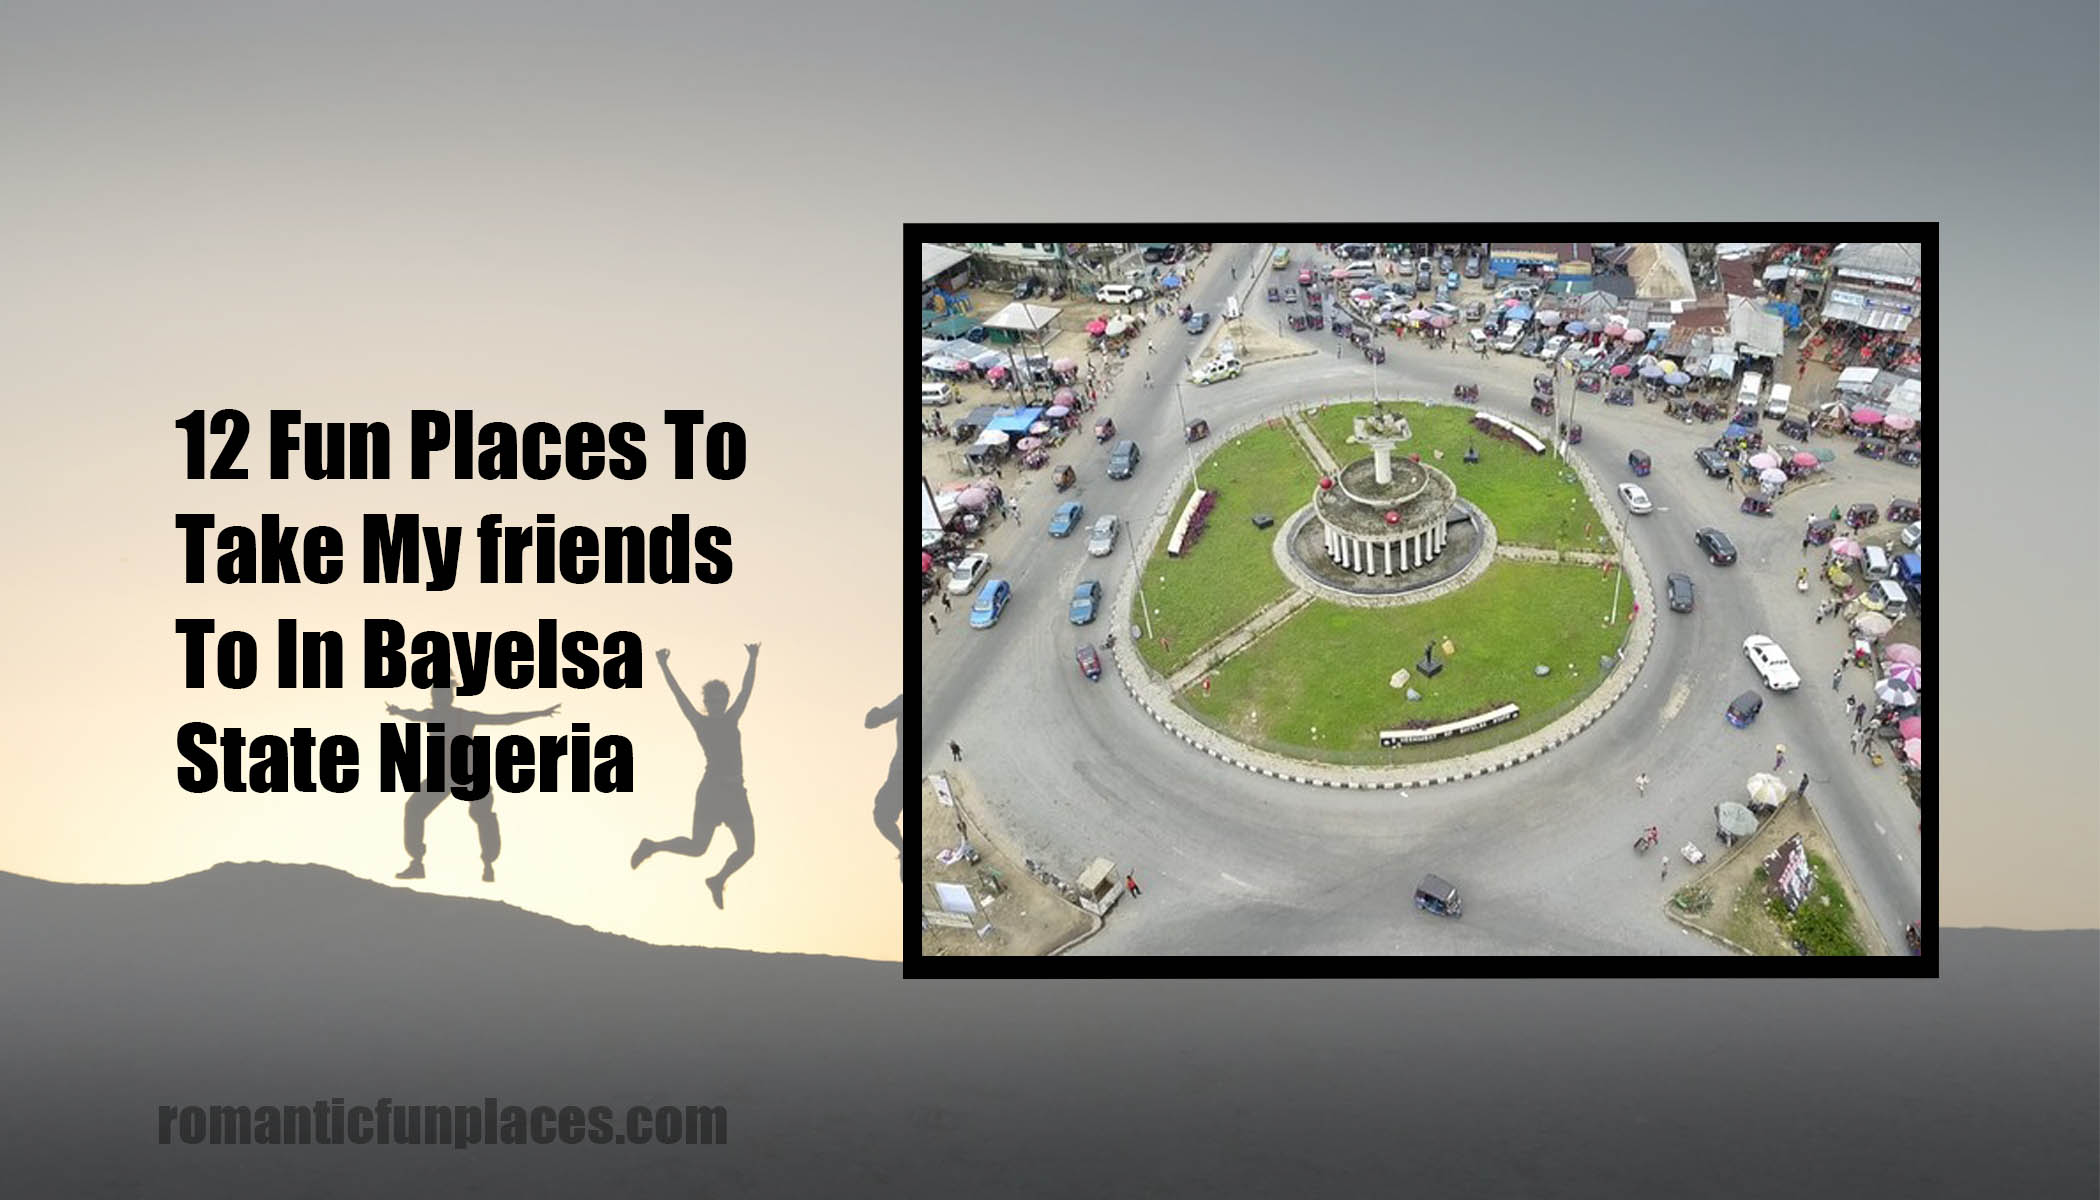 12 Fun Places To Take My friends To In Bayelsa State Nigeria